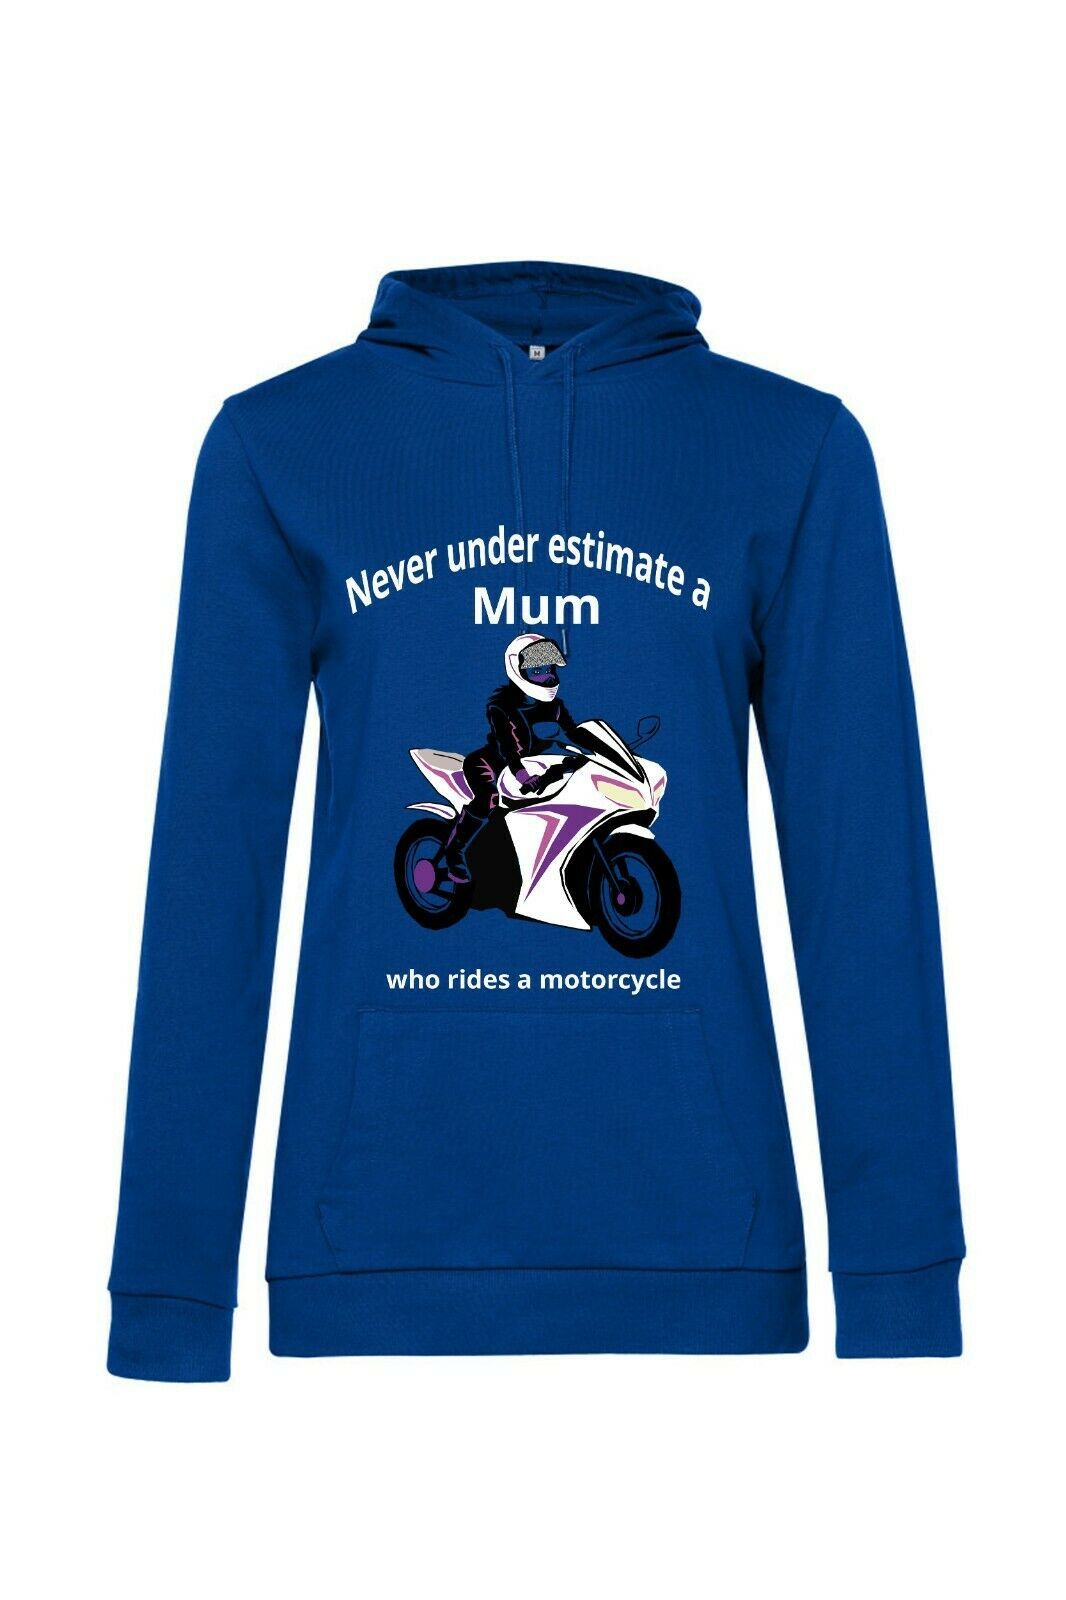 Never under estimate a Mum who rides a motorcycle blue women hoodie